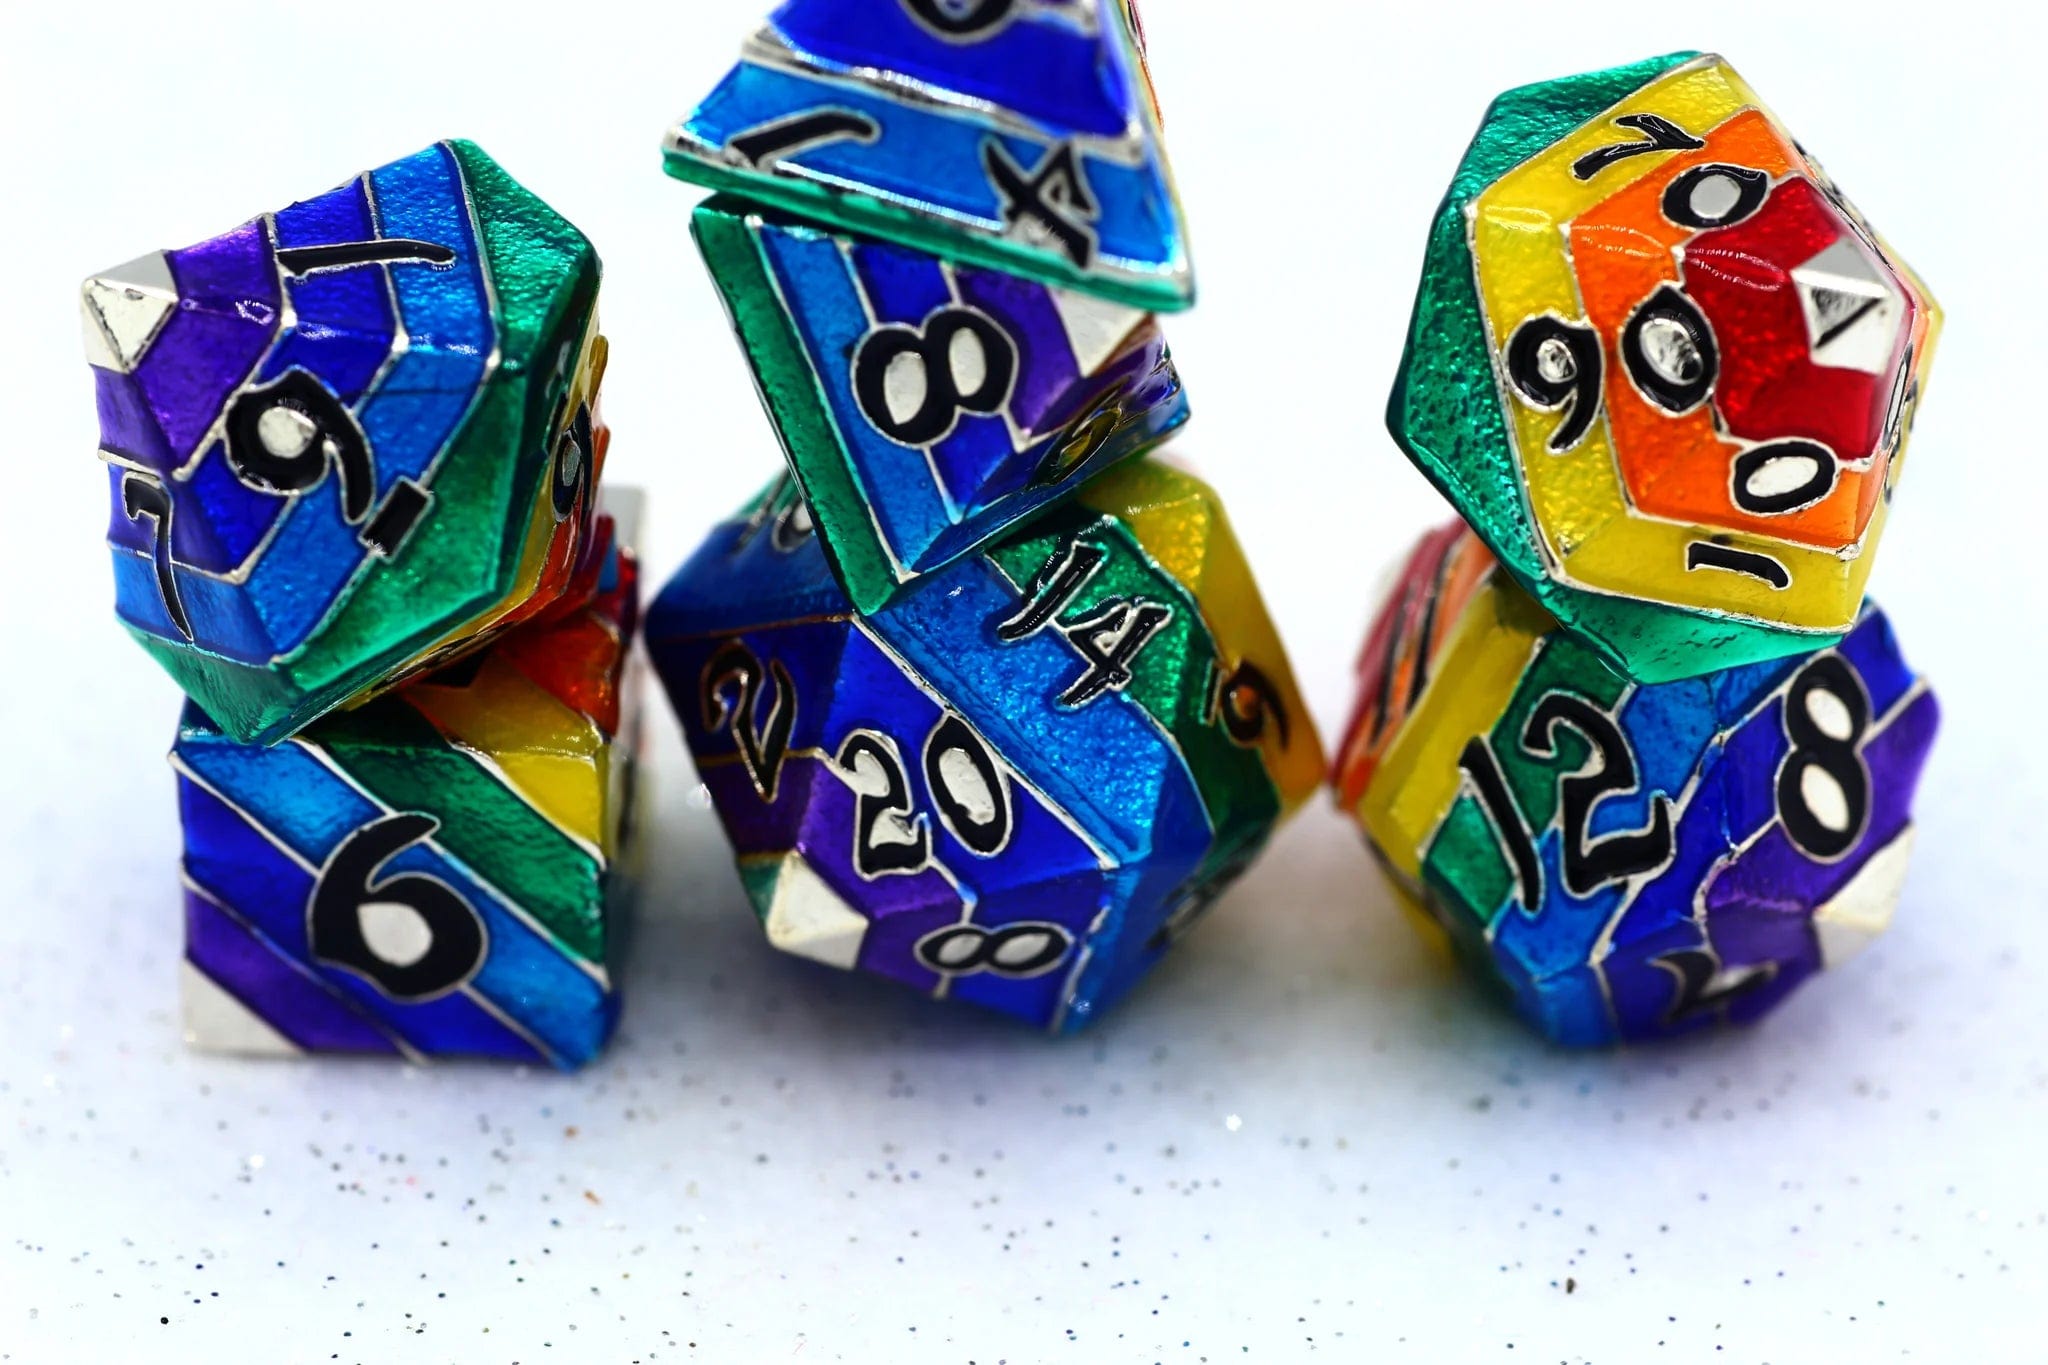 Rainbow Pride solid metal dice set - Silver with White Lettering - Saltire Games